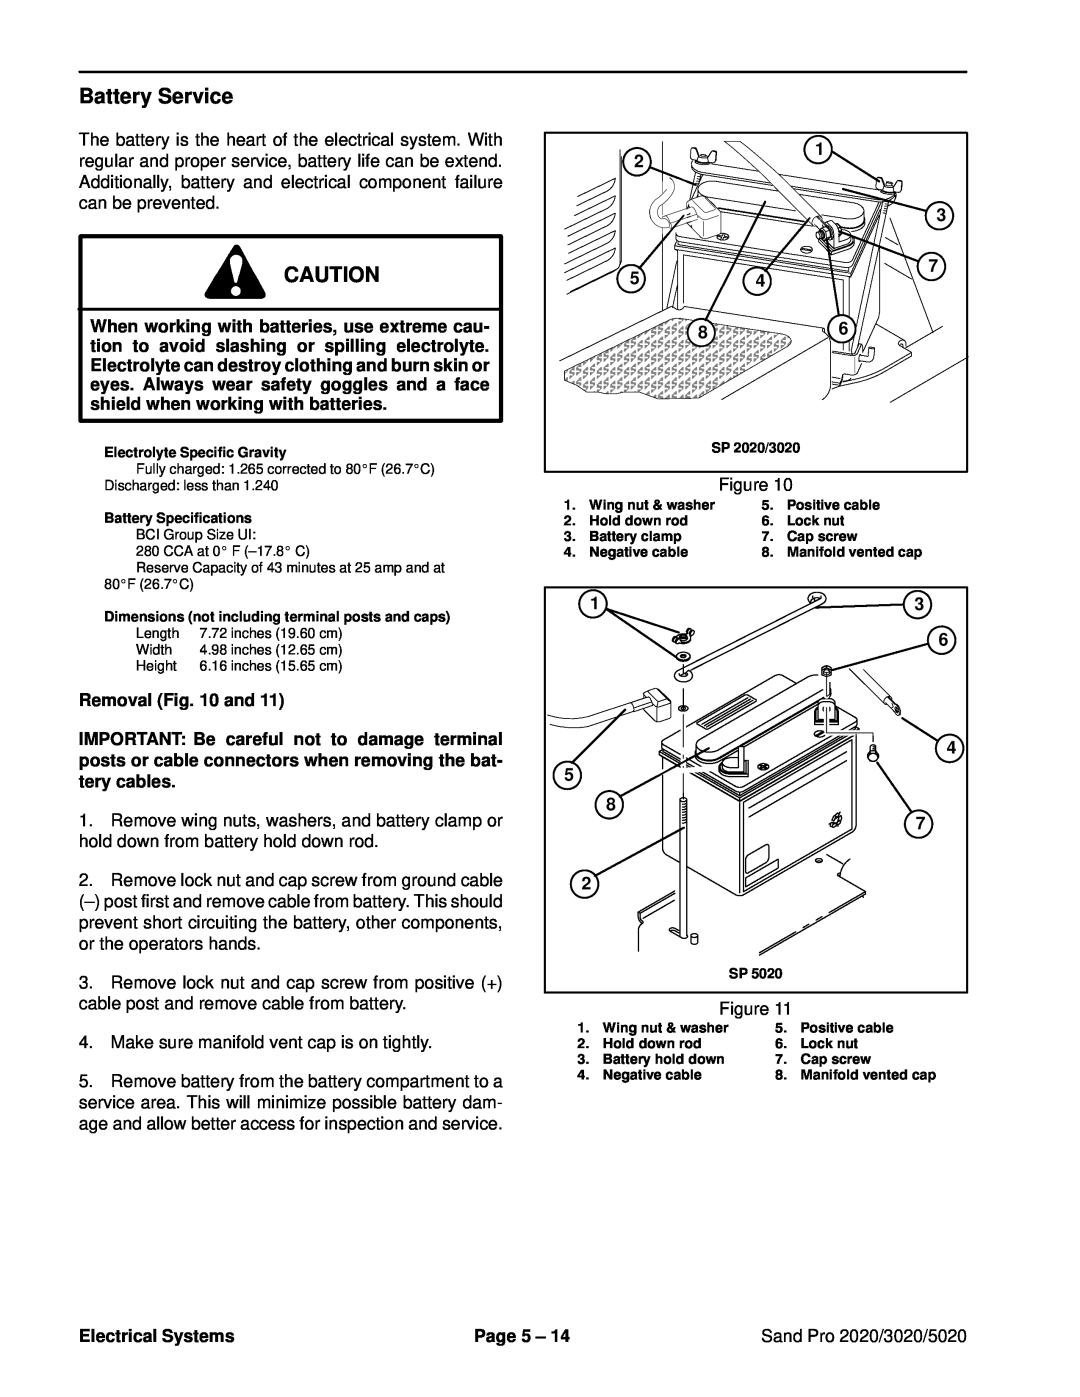 Toro service manual Battery Service, Removal and, Electrical Systems, Page 5, Sand Pro 2020/3020/5020 